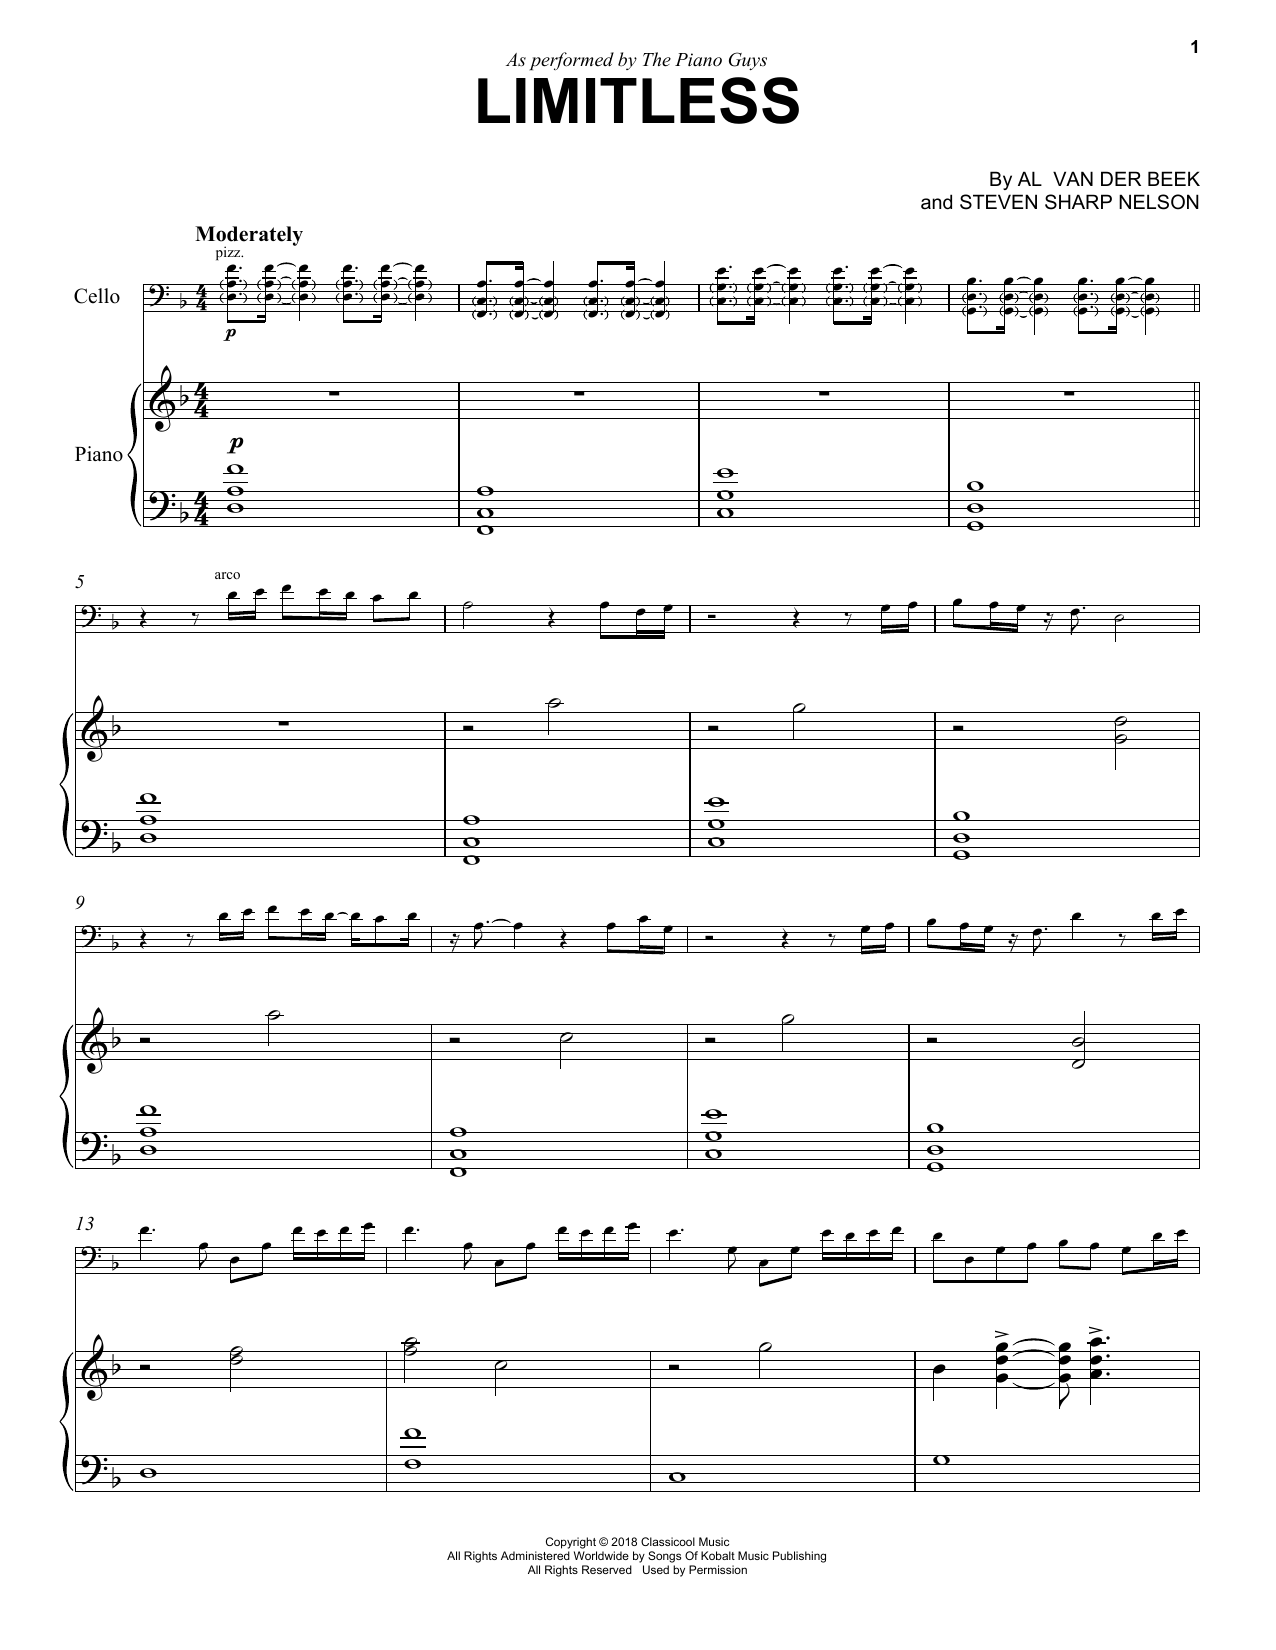 Download The Piano Guys Limitless Sheet Music